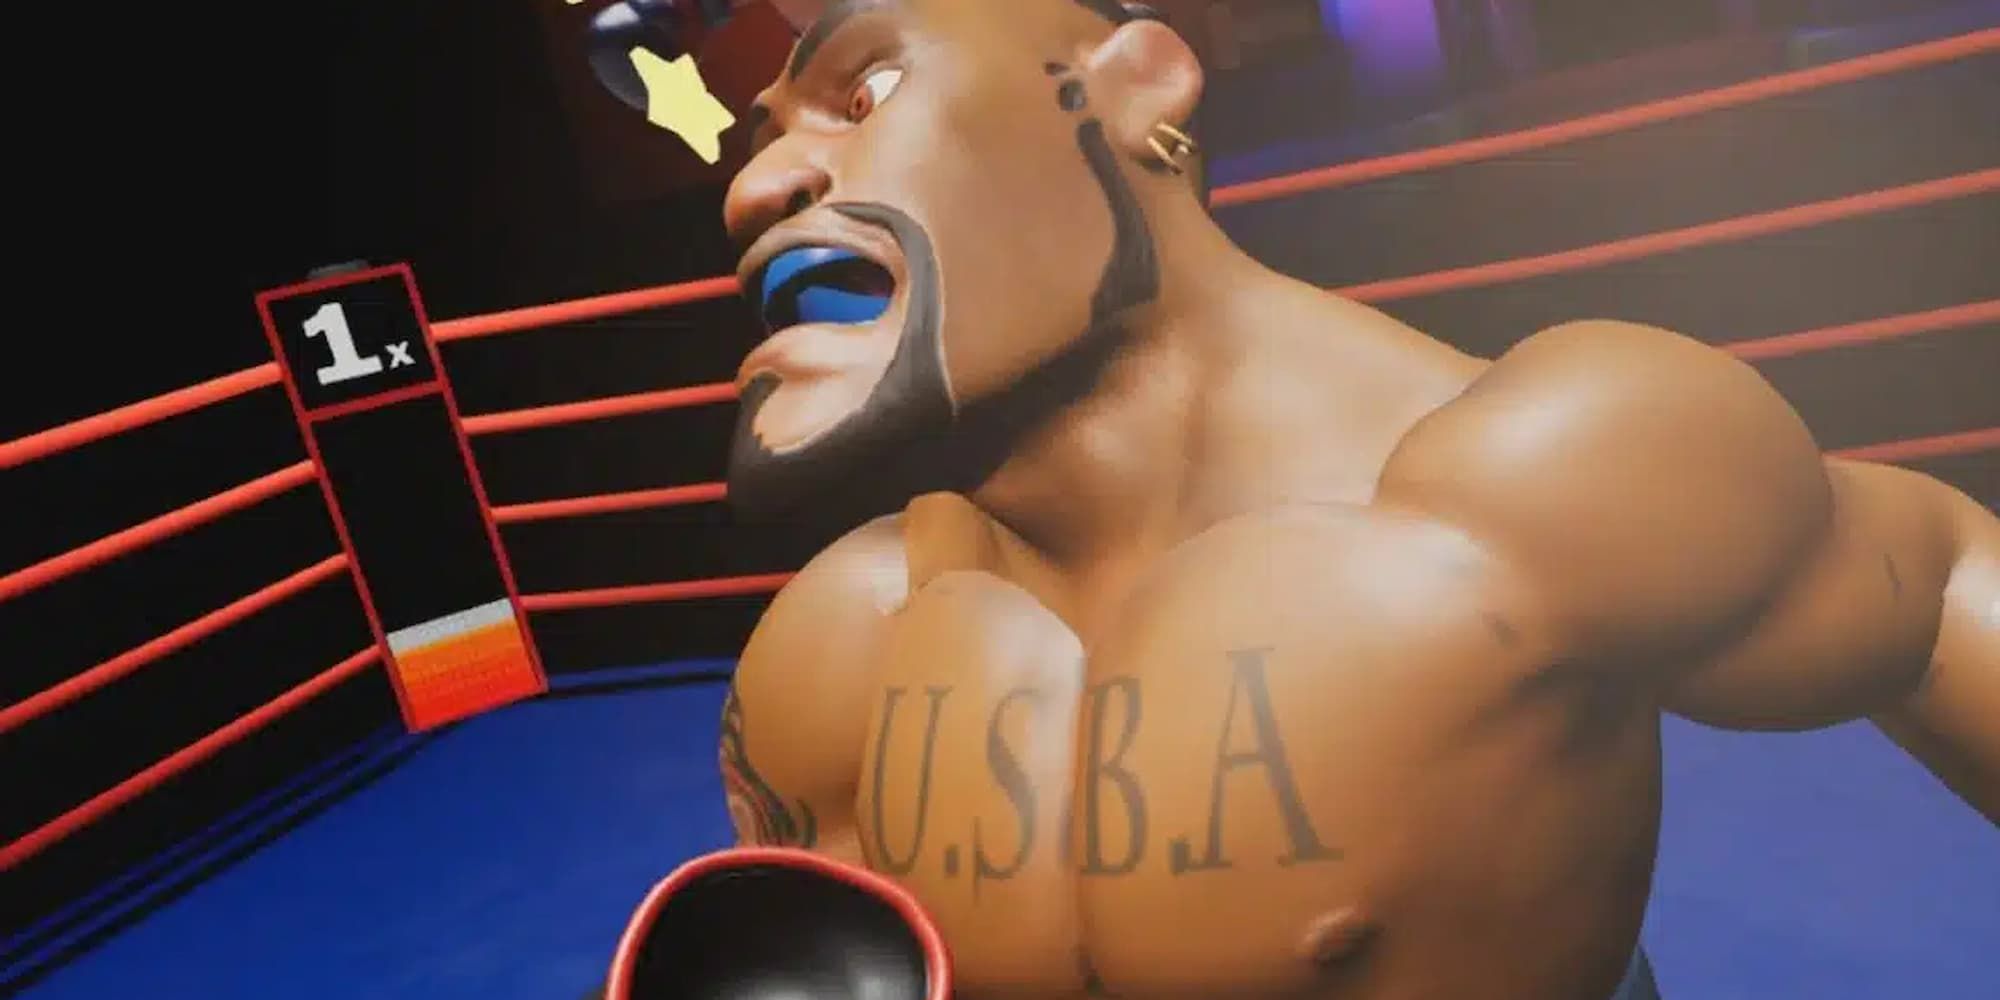 The player knocks out an opponent in Knockout League.